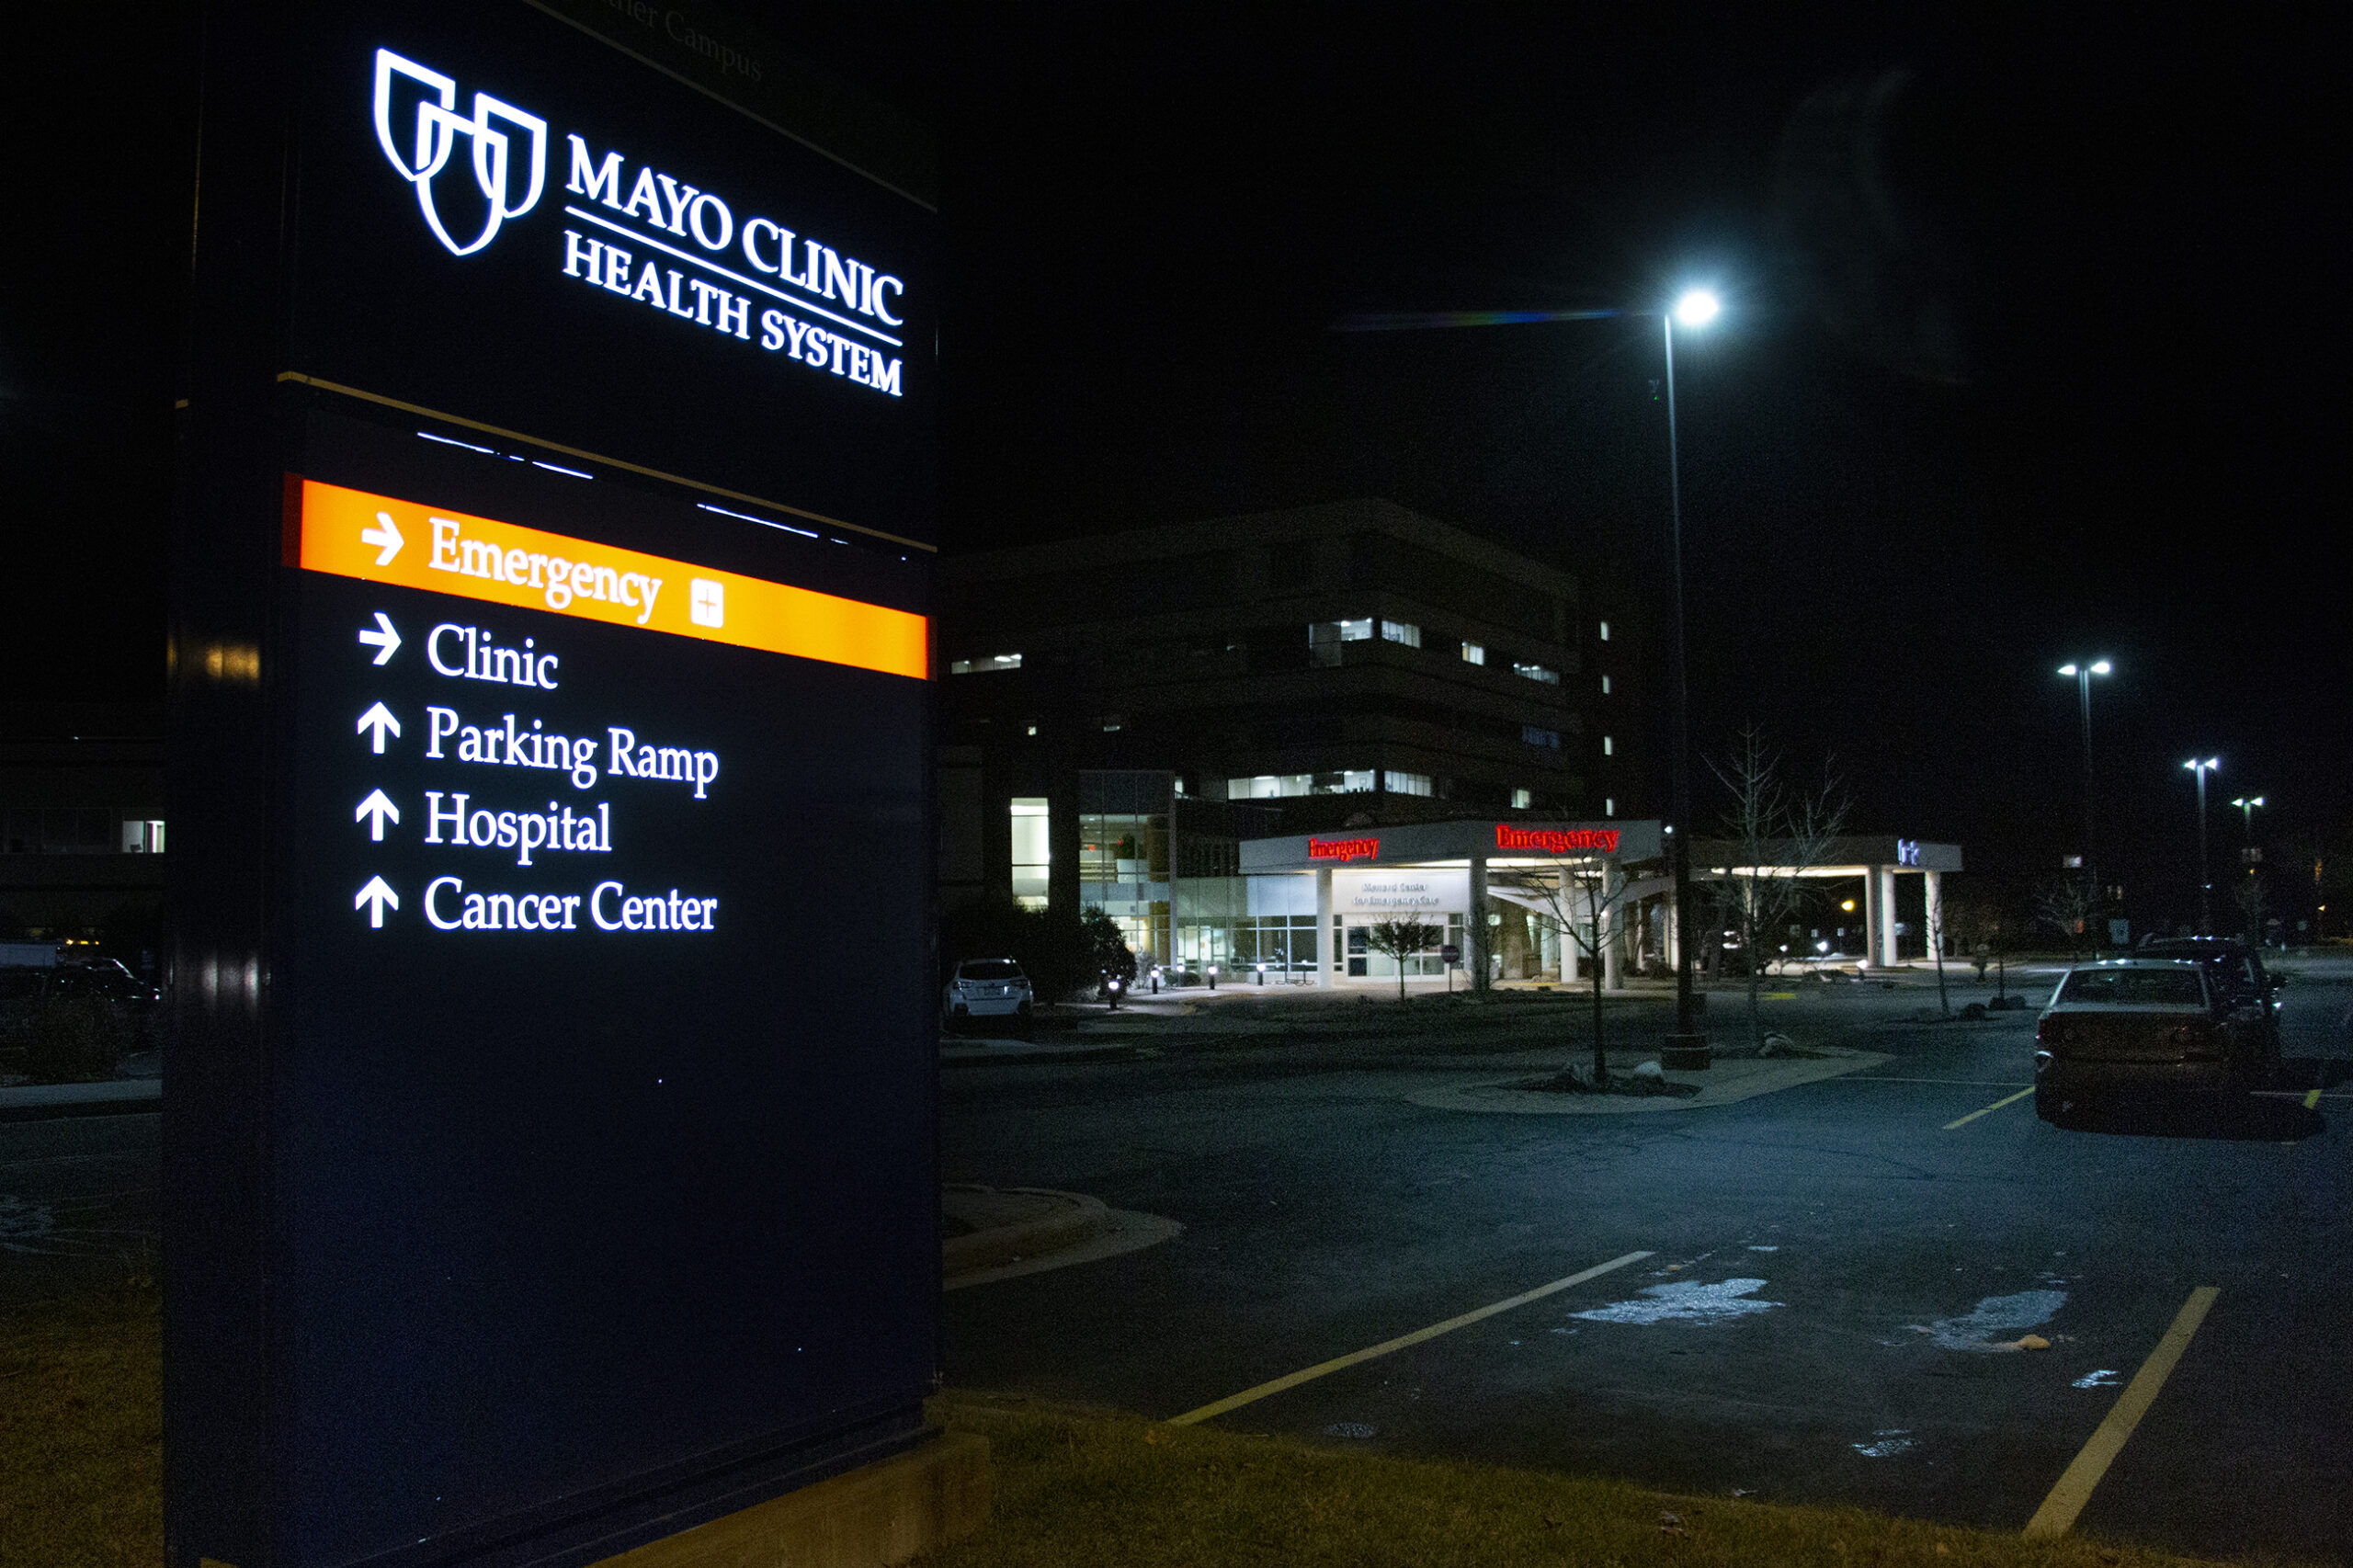 Street lights shine on the Mayo Clinic parking lot at night